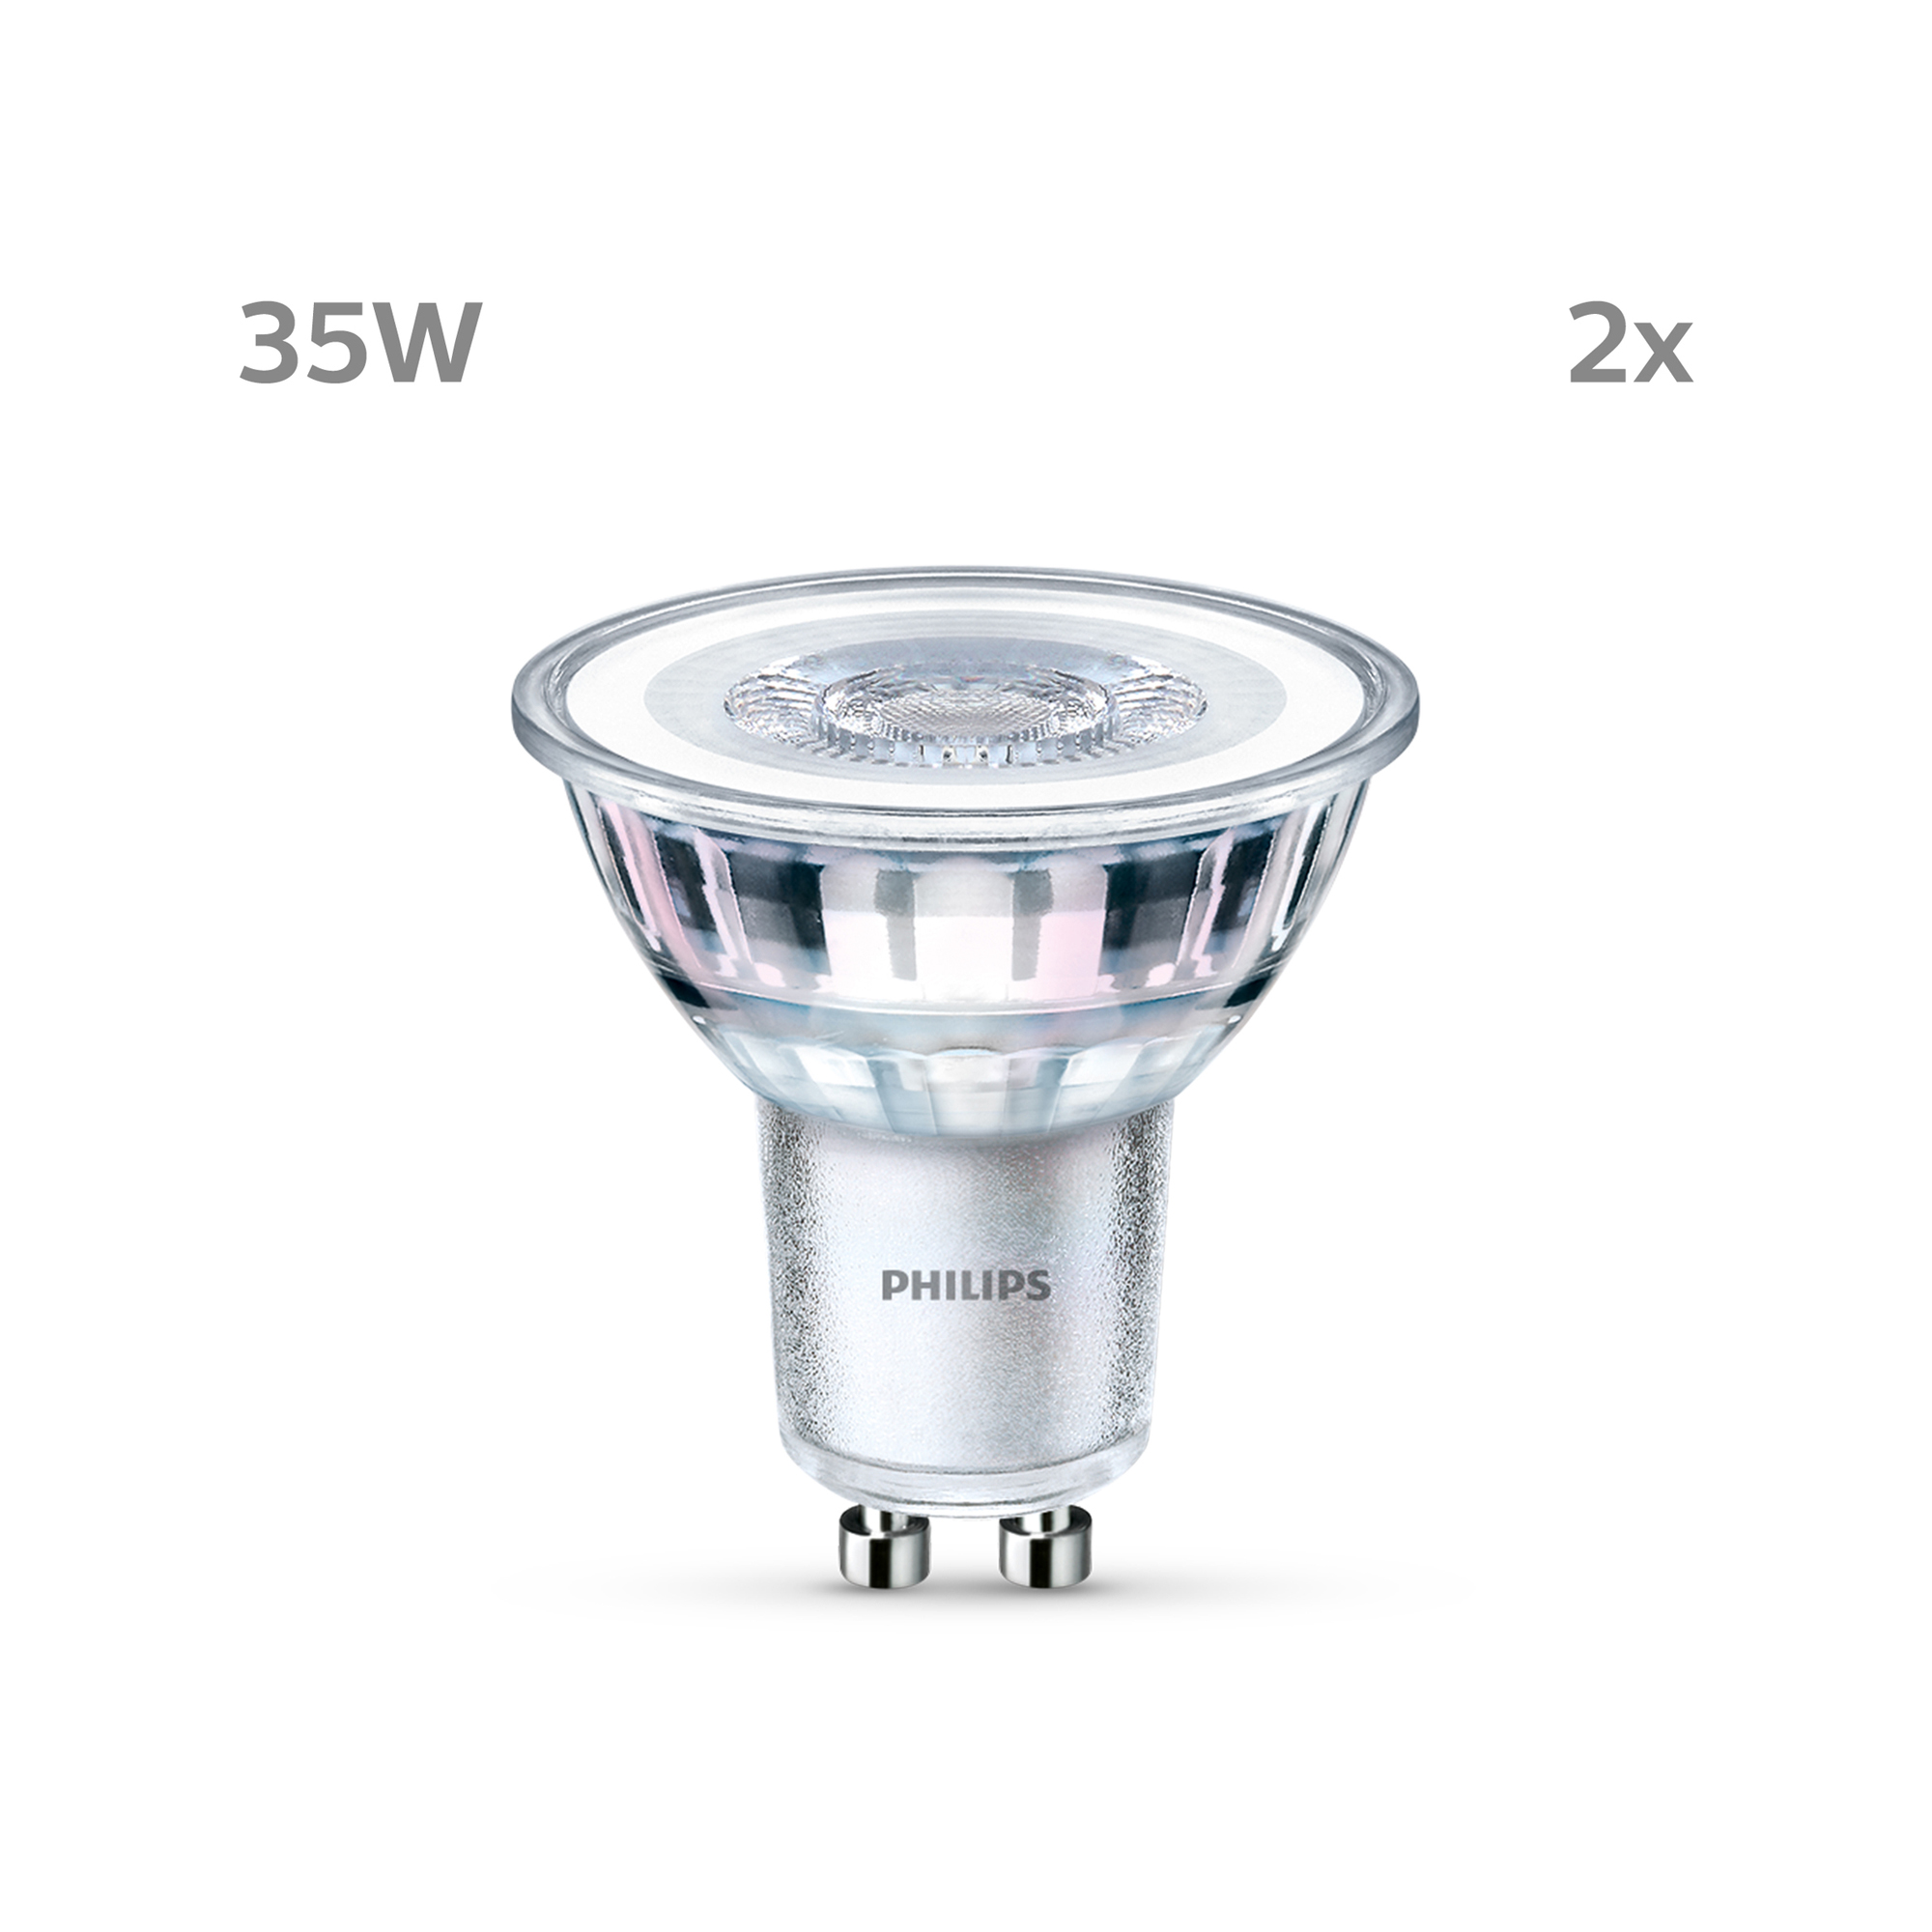 Philips LED Spot Double Pack 3.5-35W GU10 840 36° 275lm 4000K